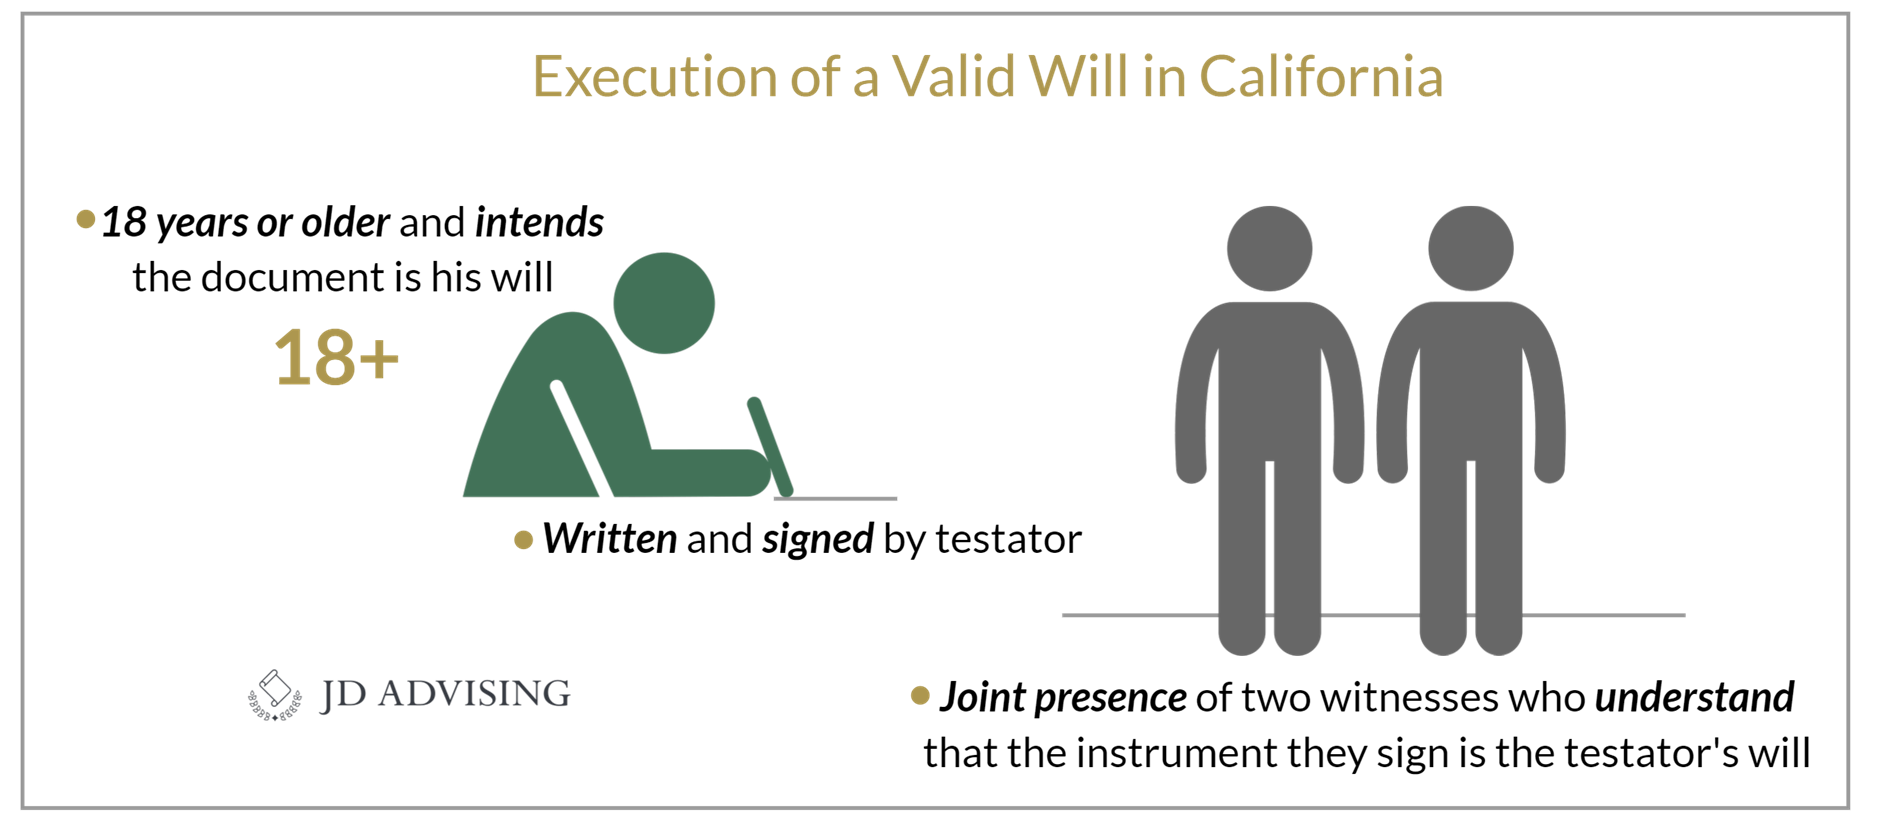 Execution of a Valid Will in California